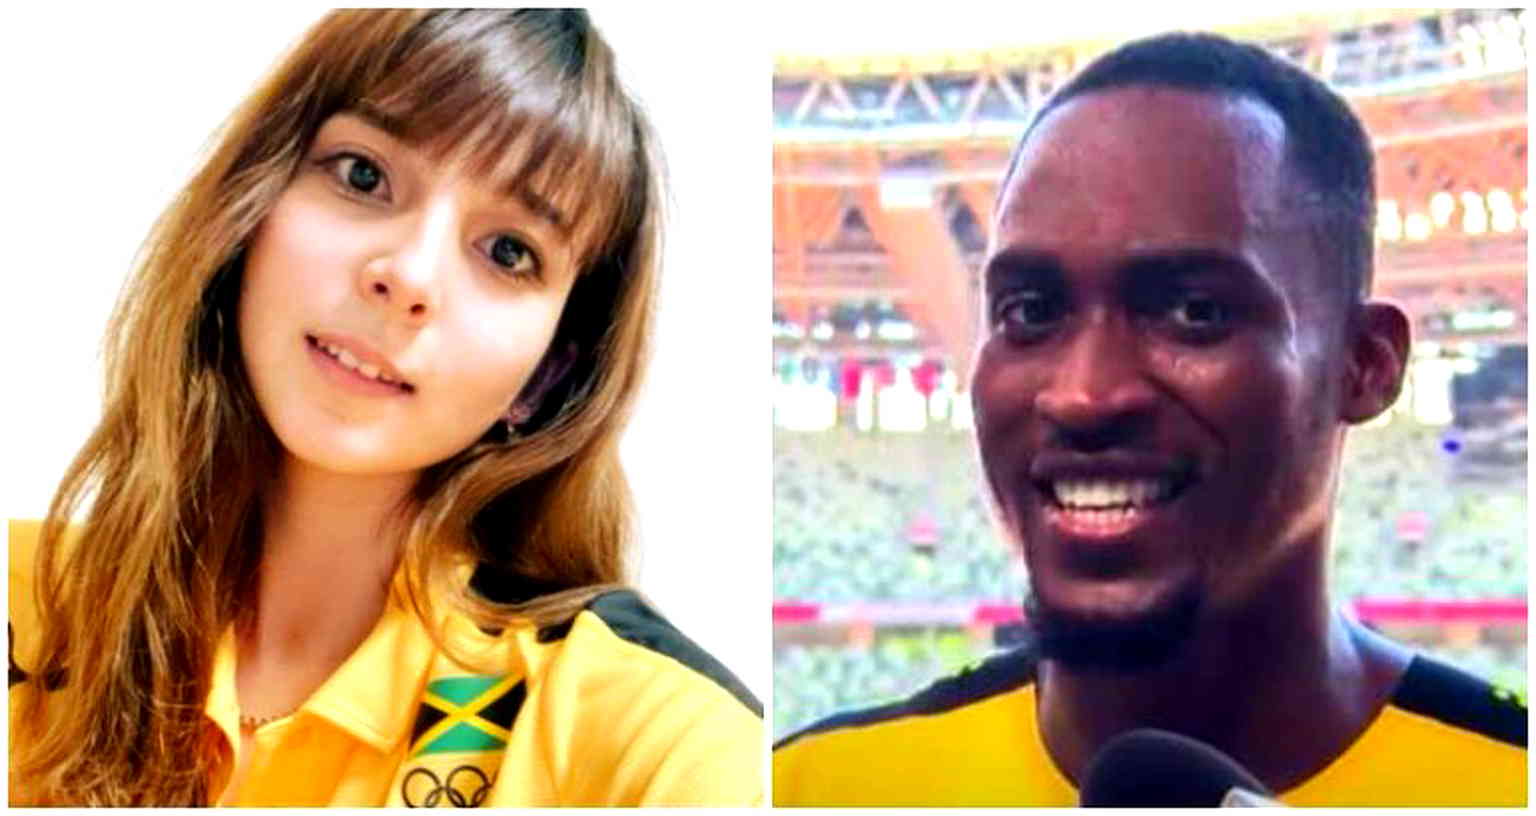 Jamaican hurdler saved by Japanese Serbian woman from missing Olympic race, wins gold medal